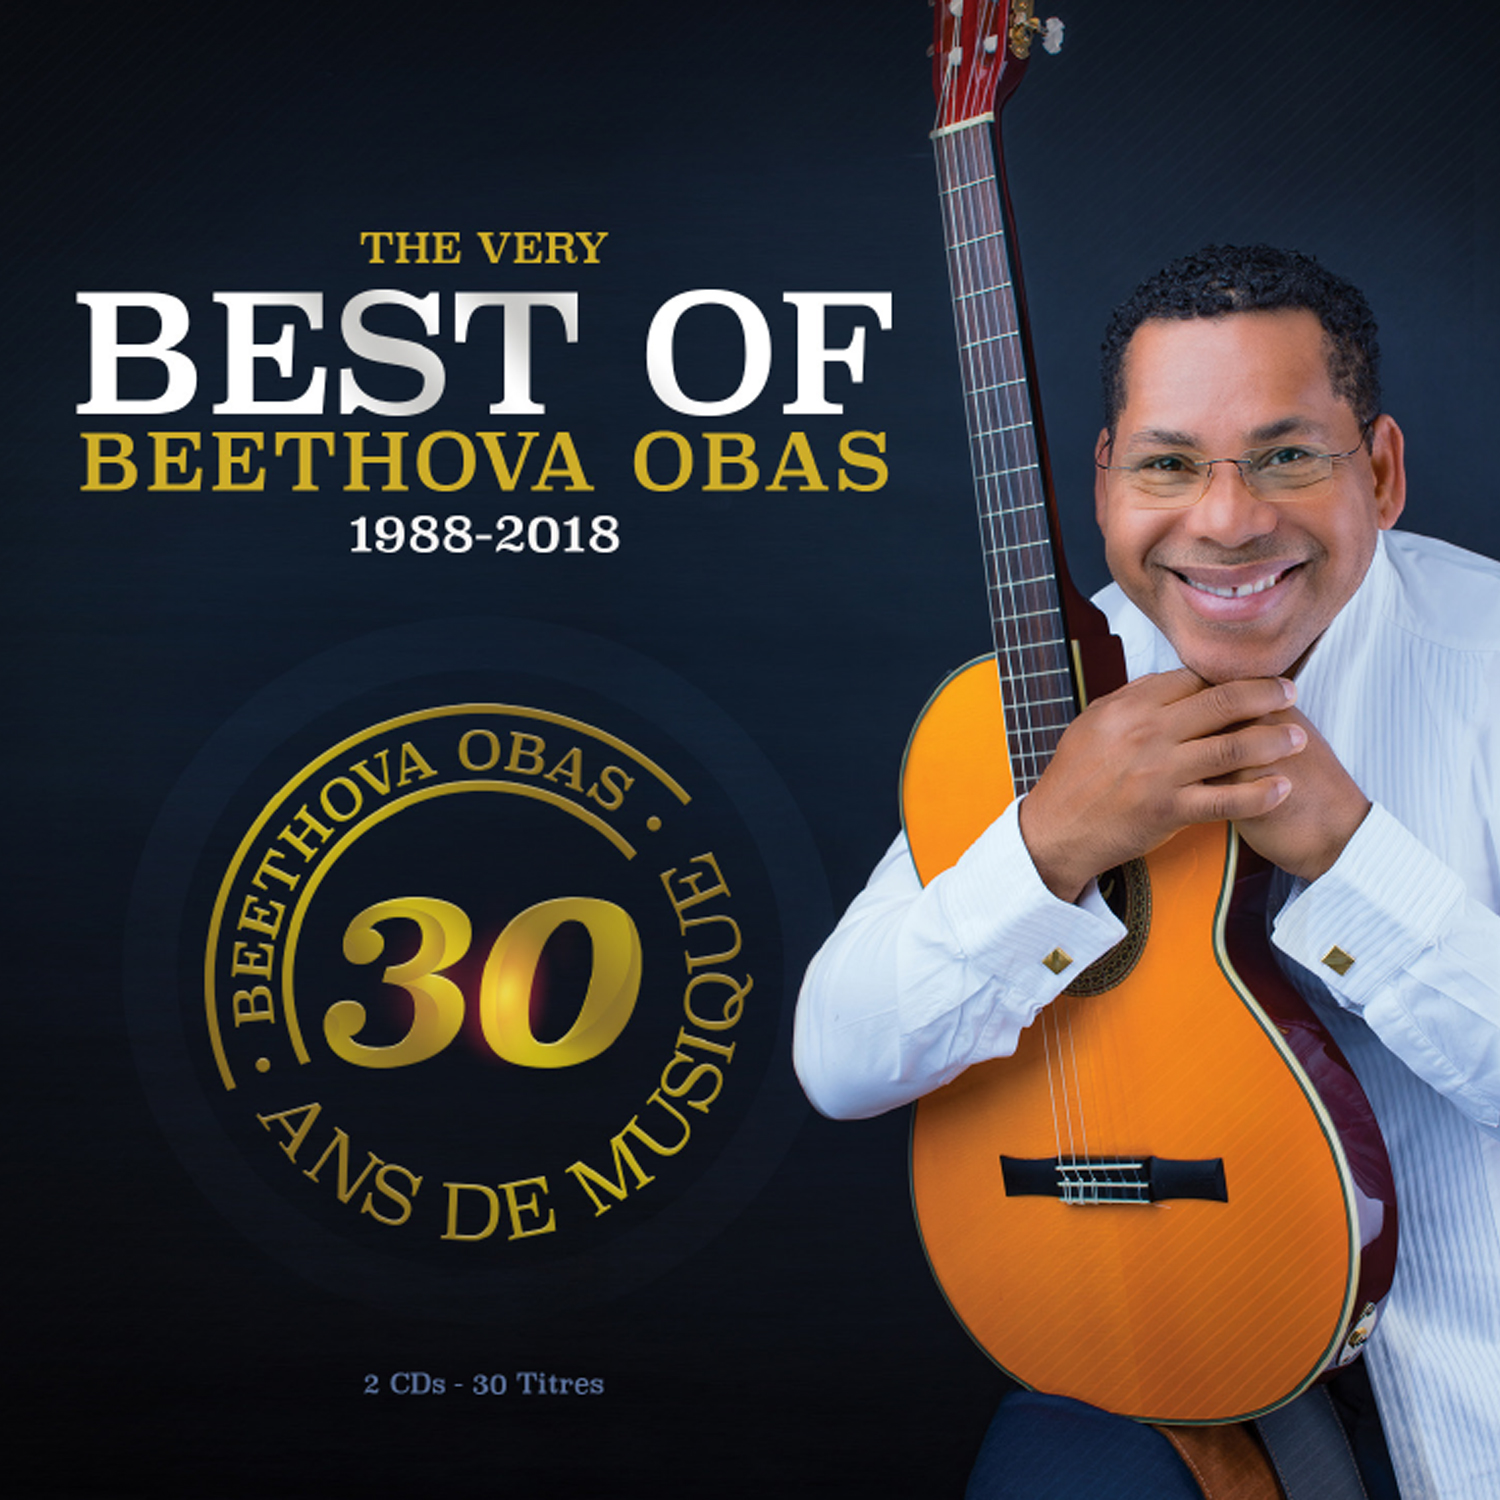 couverture de Beethova Obas album The very best of Beethova Obas